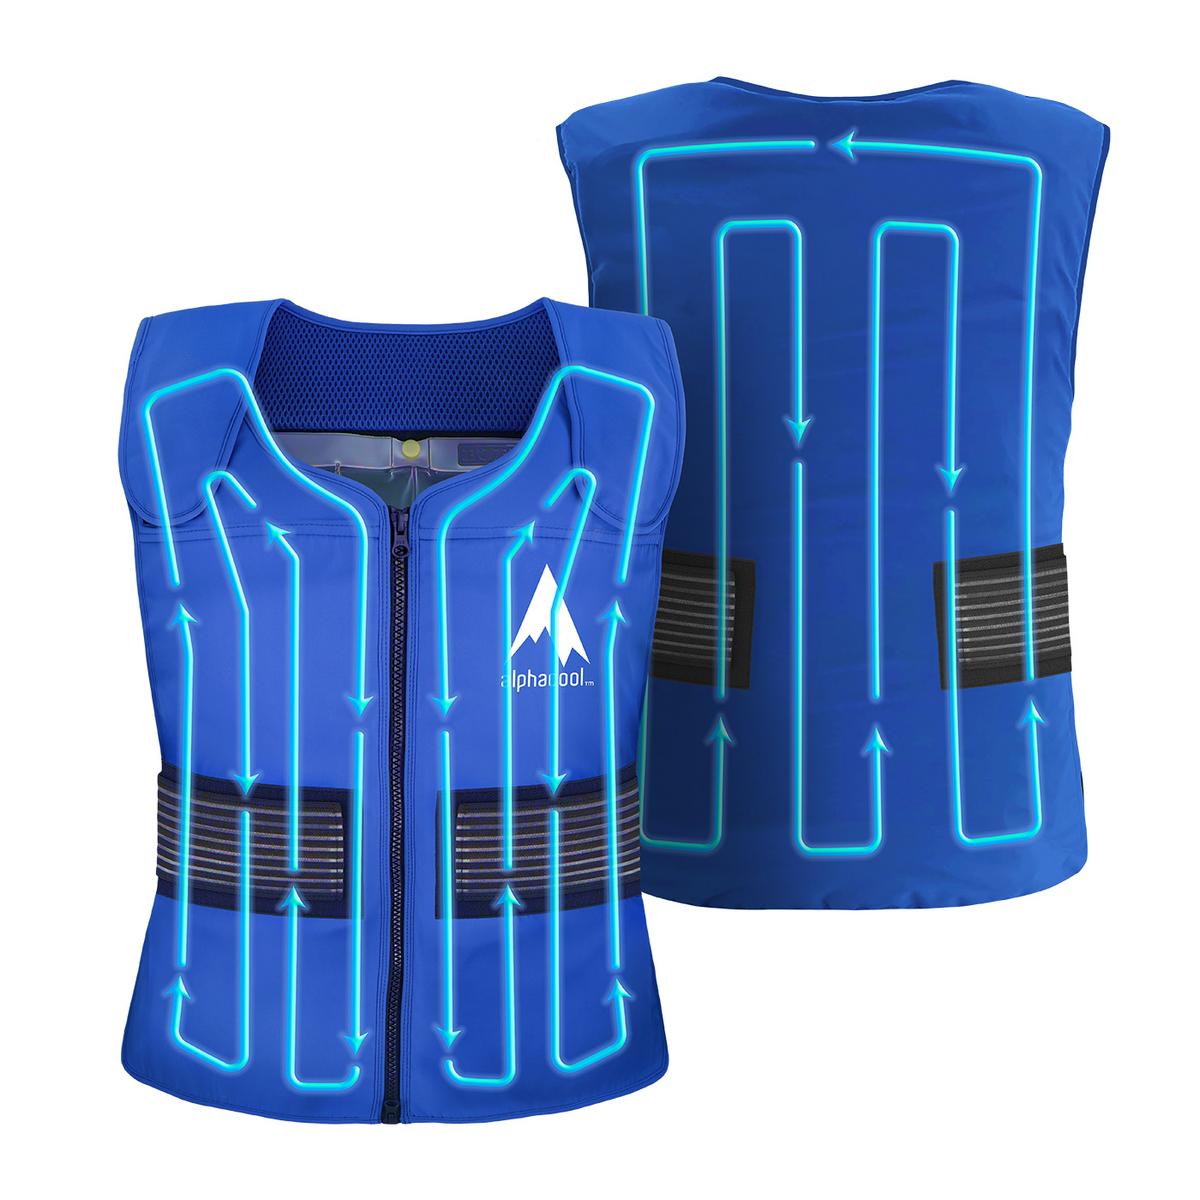 AlphaCool 7V Circulatory Cooling Vest System - The Warming Store